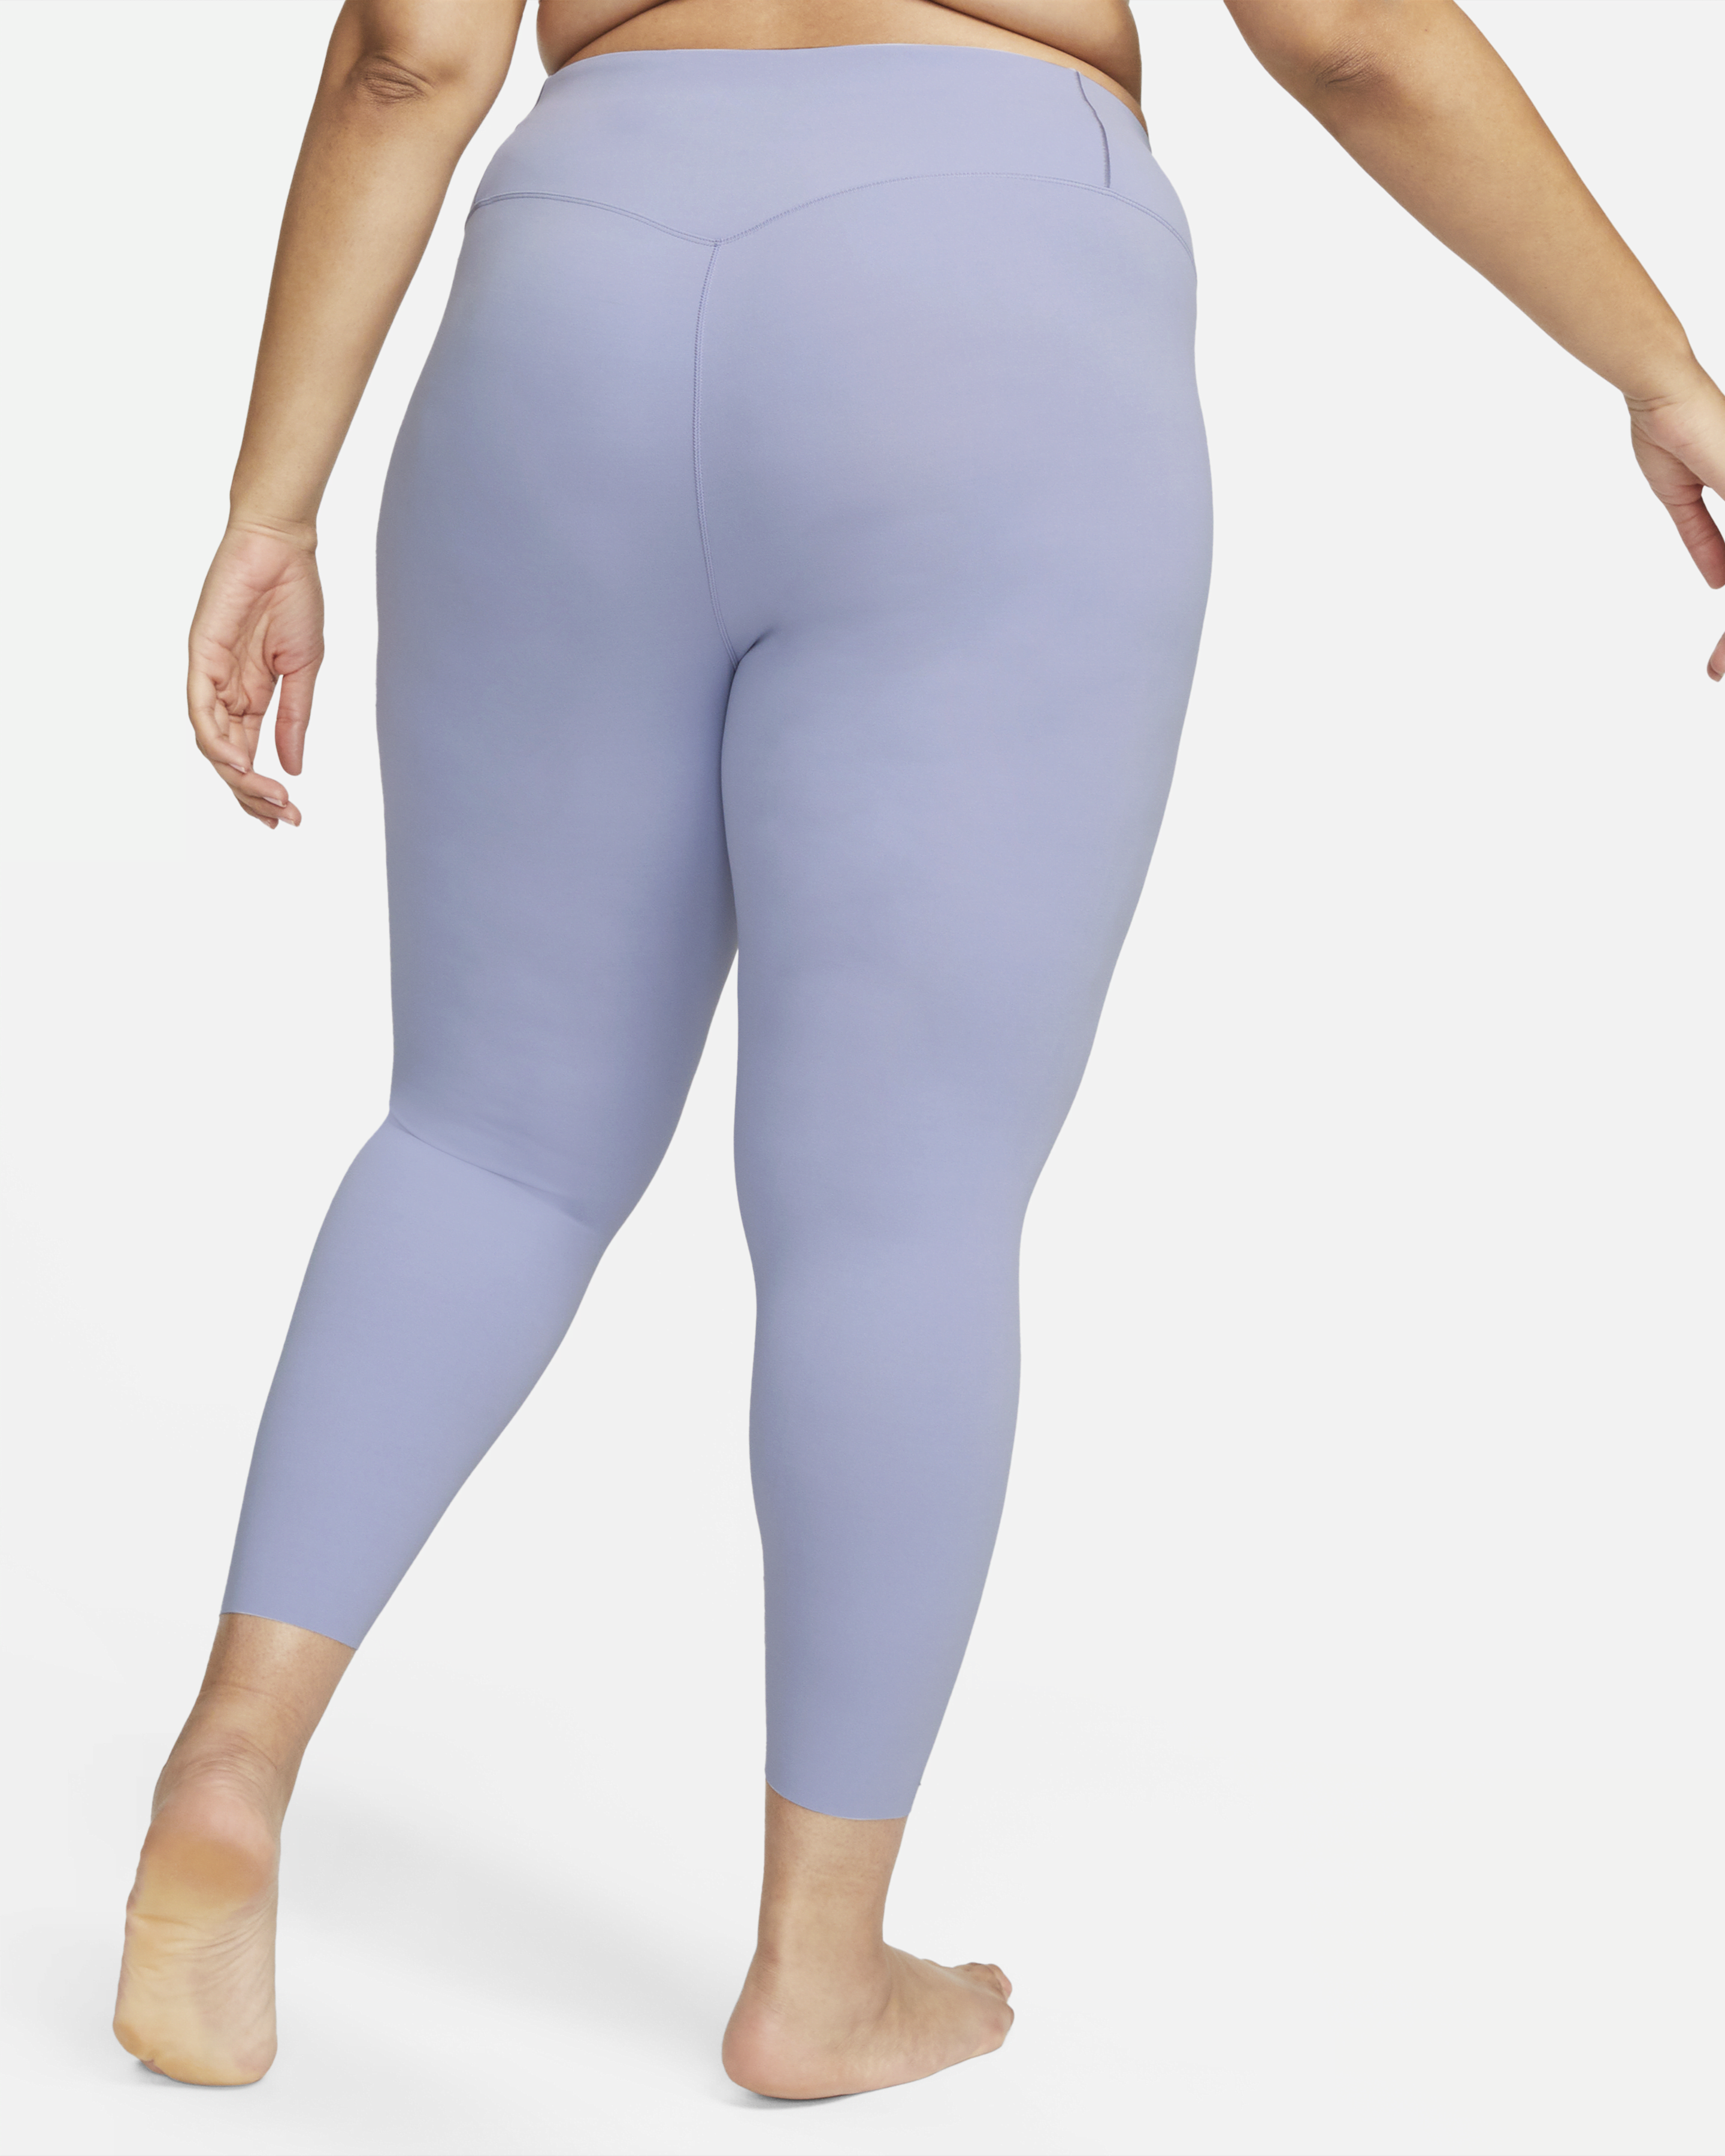 AYBL - We can't get enough of the blue ombré leggings - Who